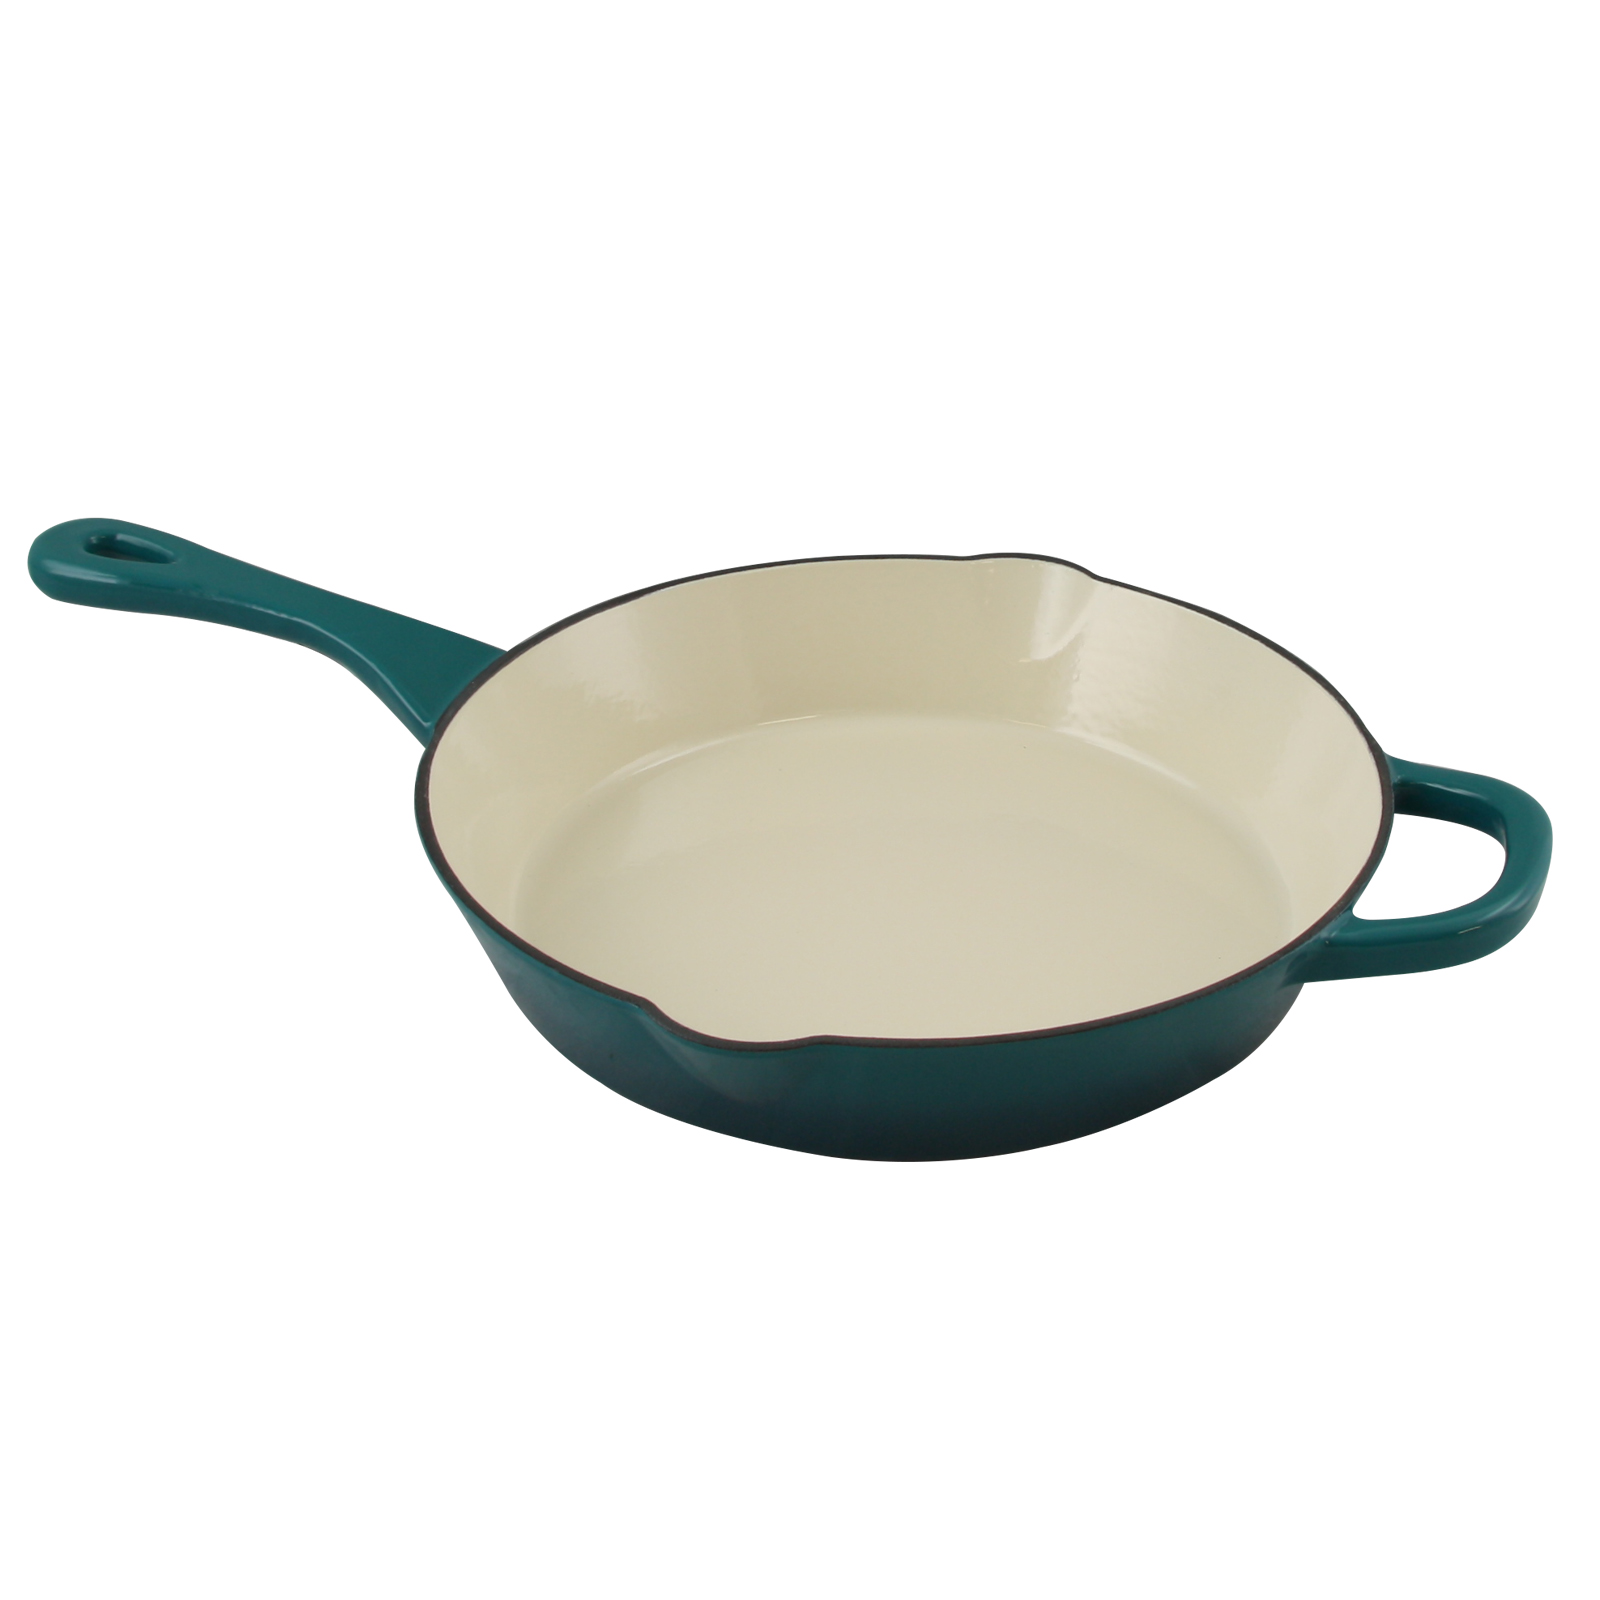 Crock-Pot. Artisan Enameled 10" Round Cast Iron Skillet in Teal Ombre